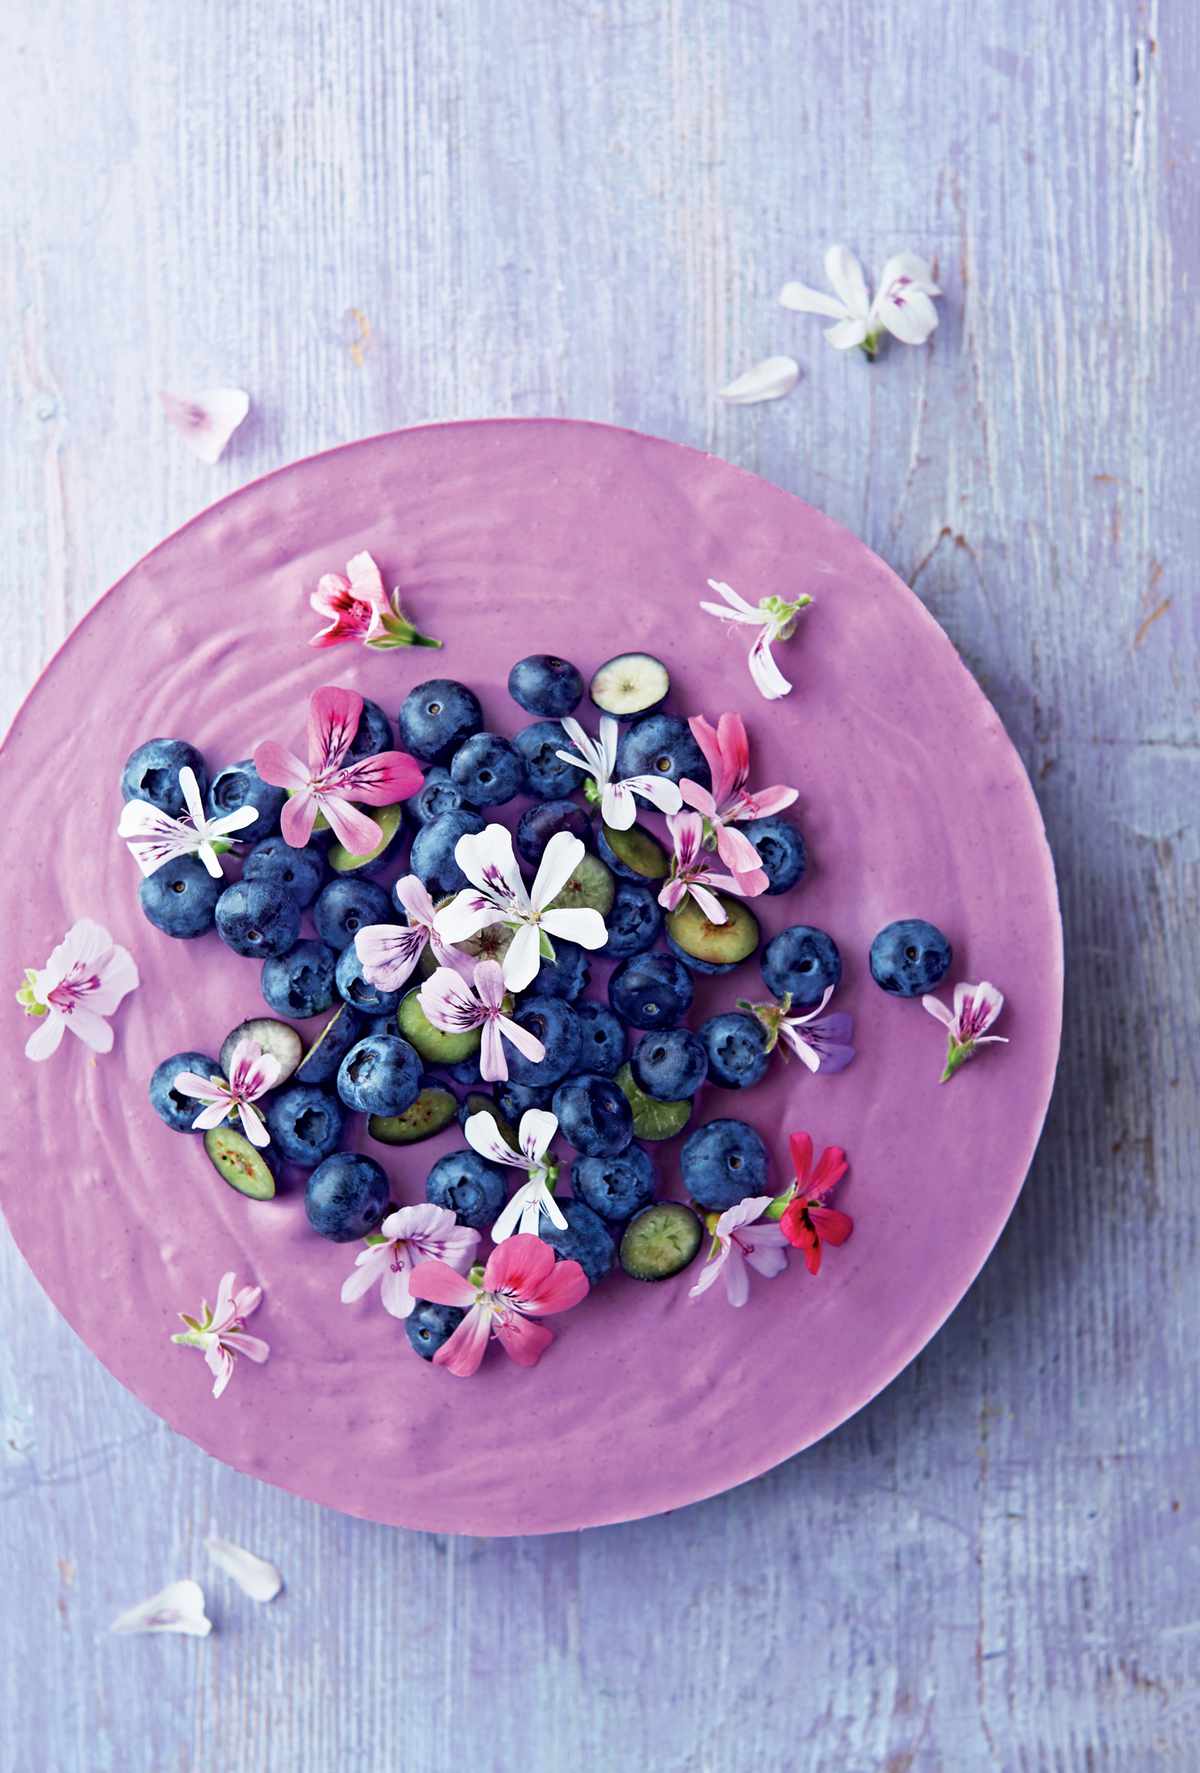 BLUEBERRY LEMON MOUSSE CAKE WITH SCENTED GERANIUM FLOWERS